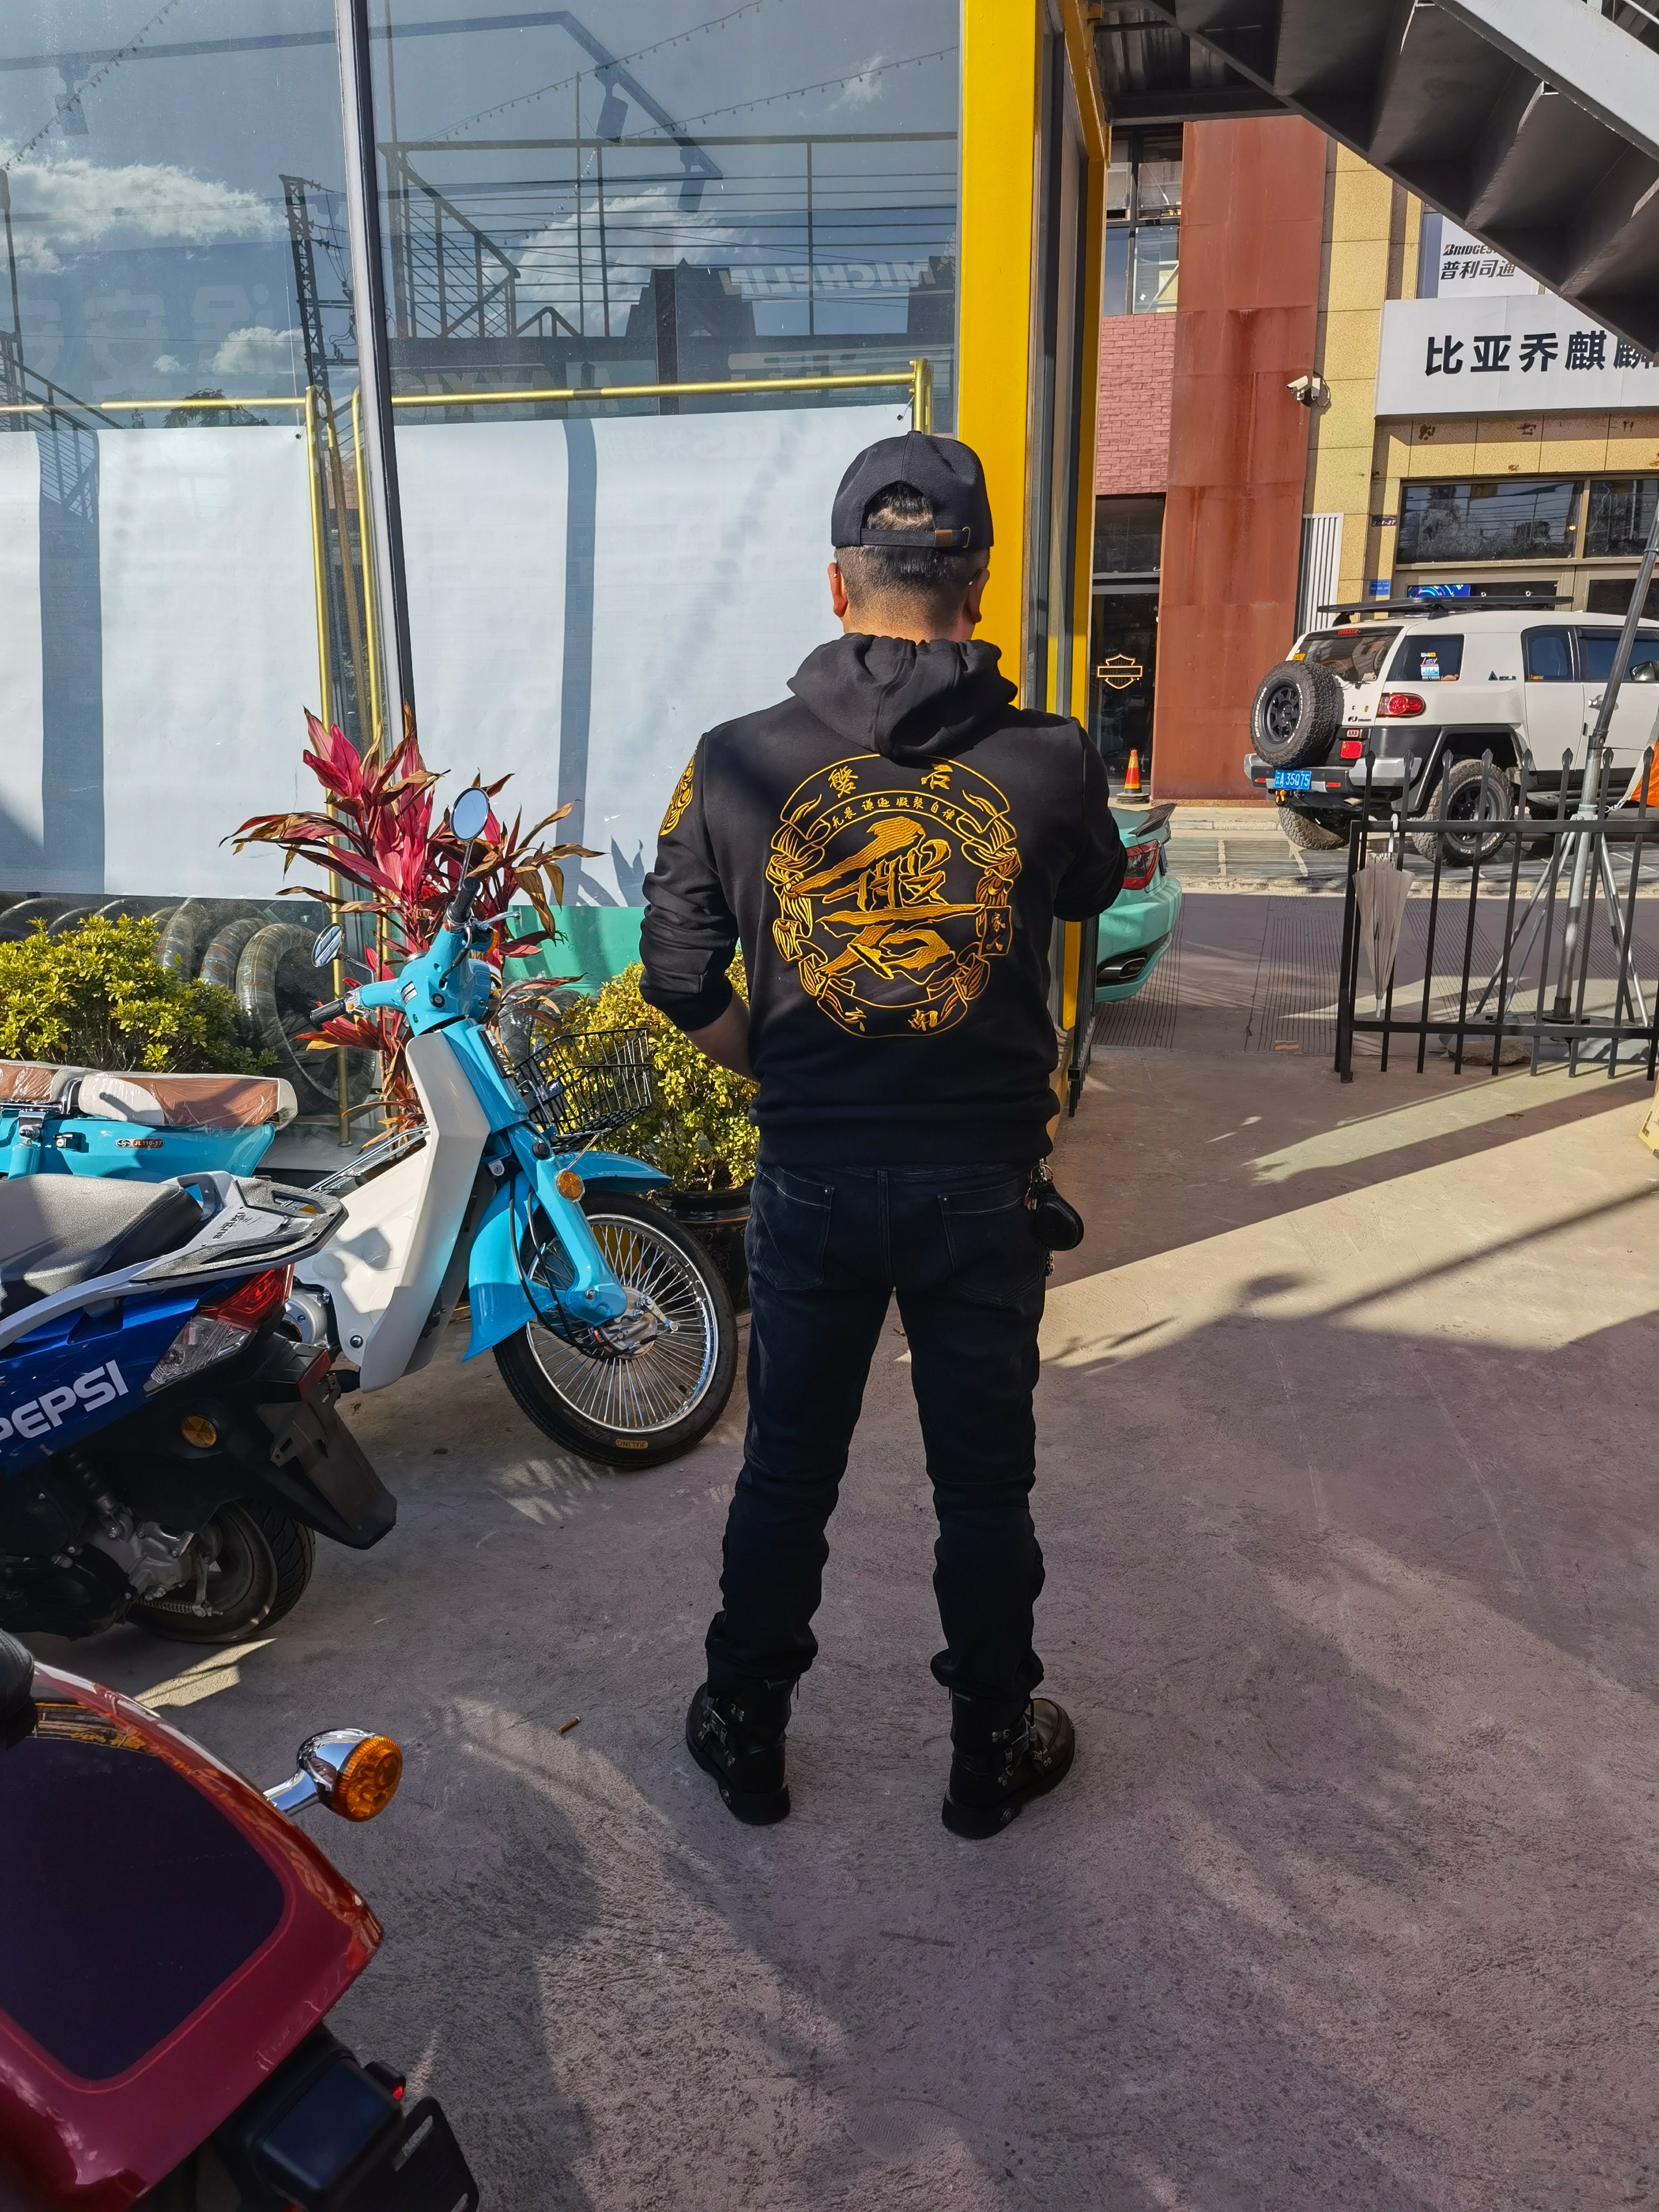 Biker Hoodies: Style, Protection, and Motorcycle Club Fashion